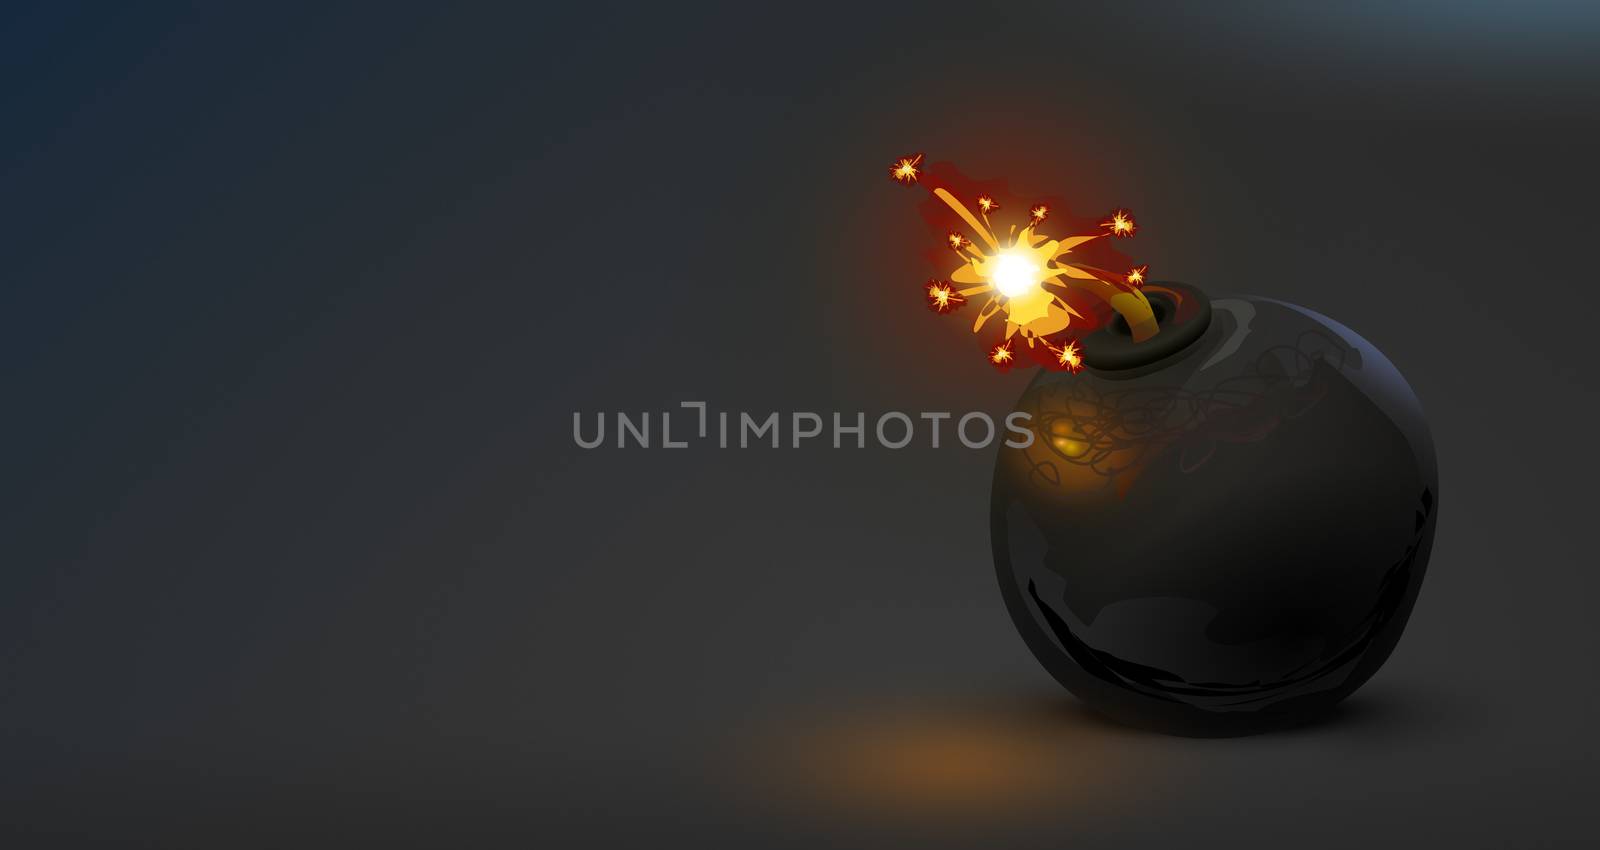 An illustration of an old typical burning bomb